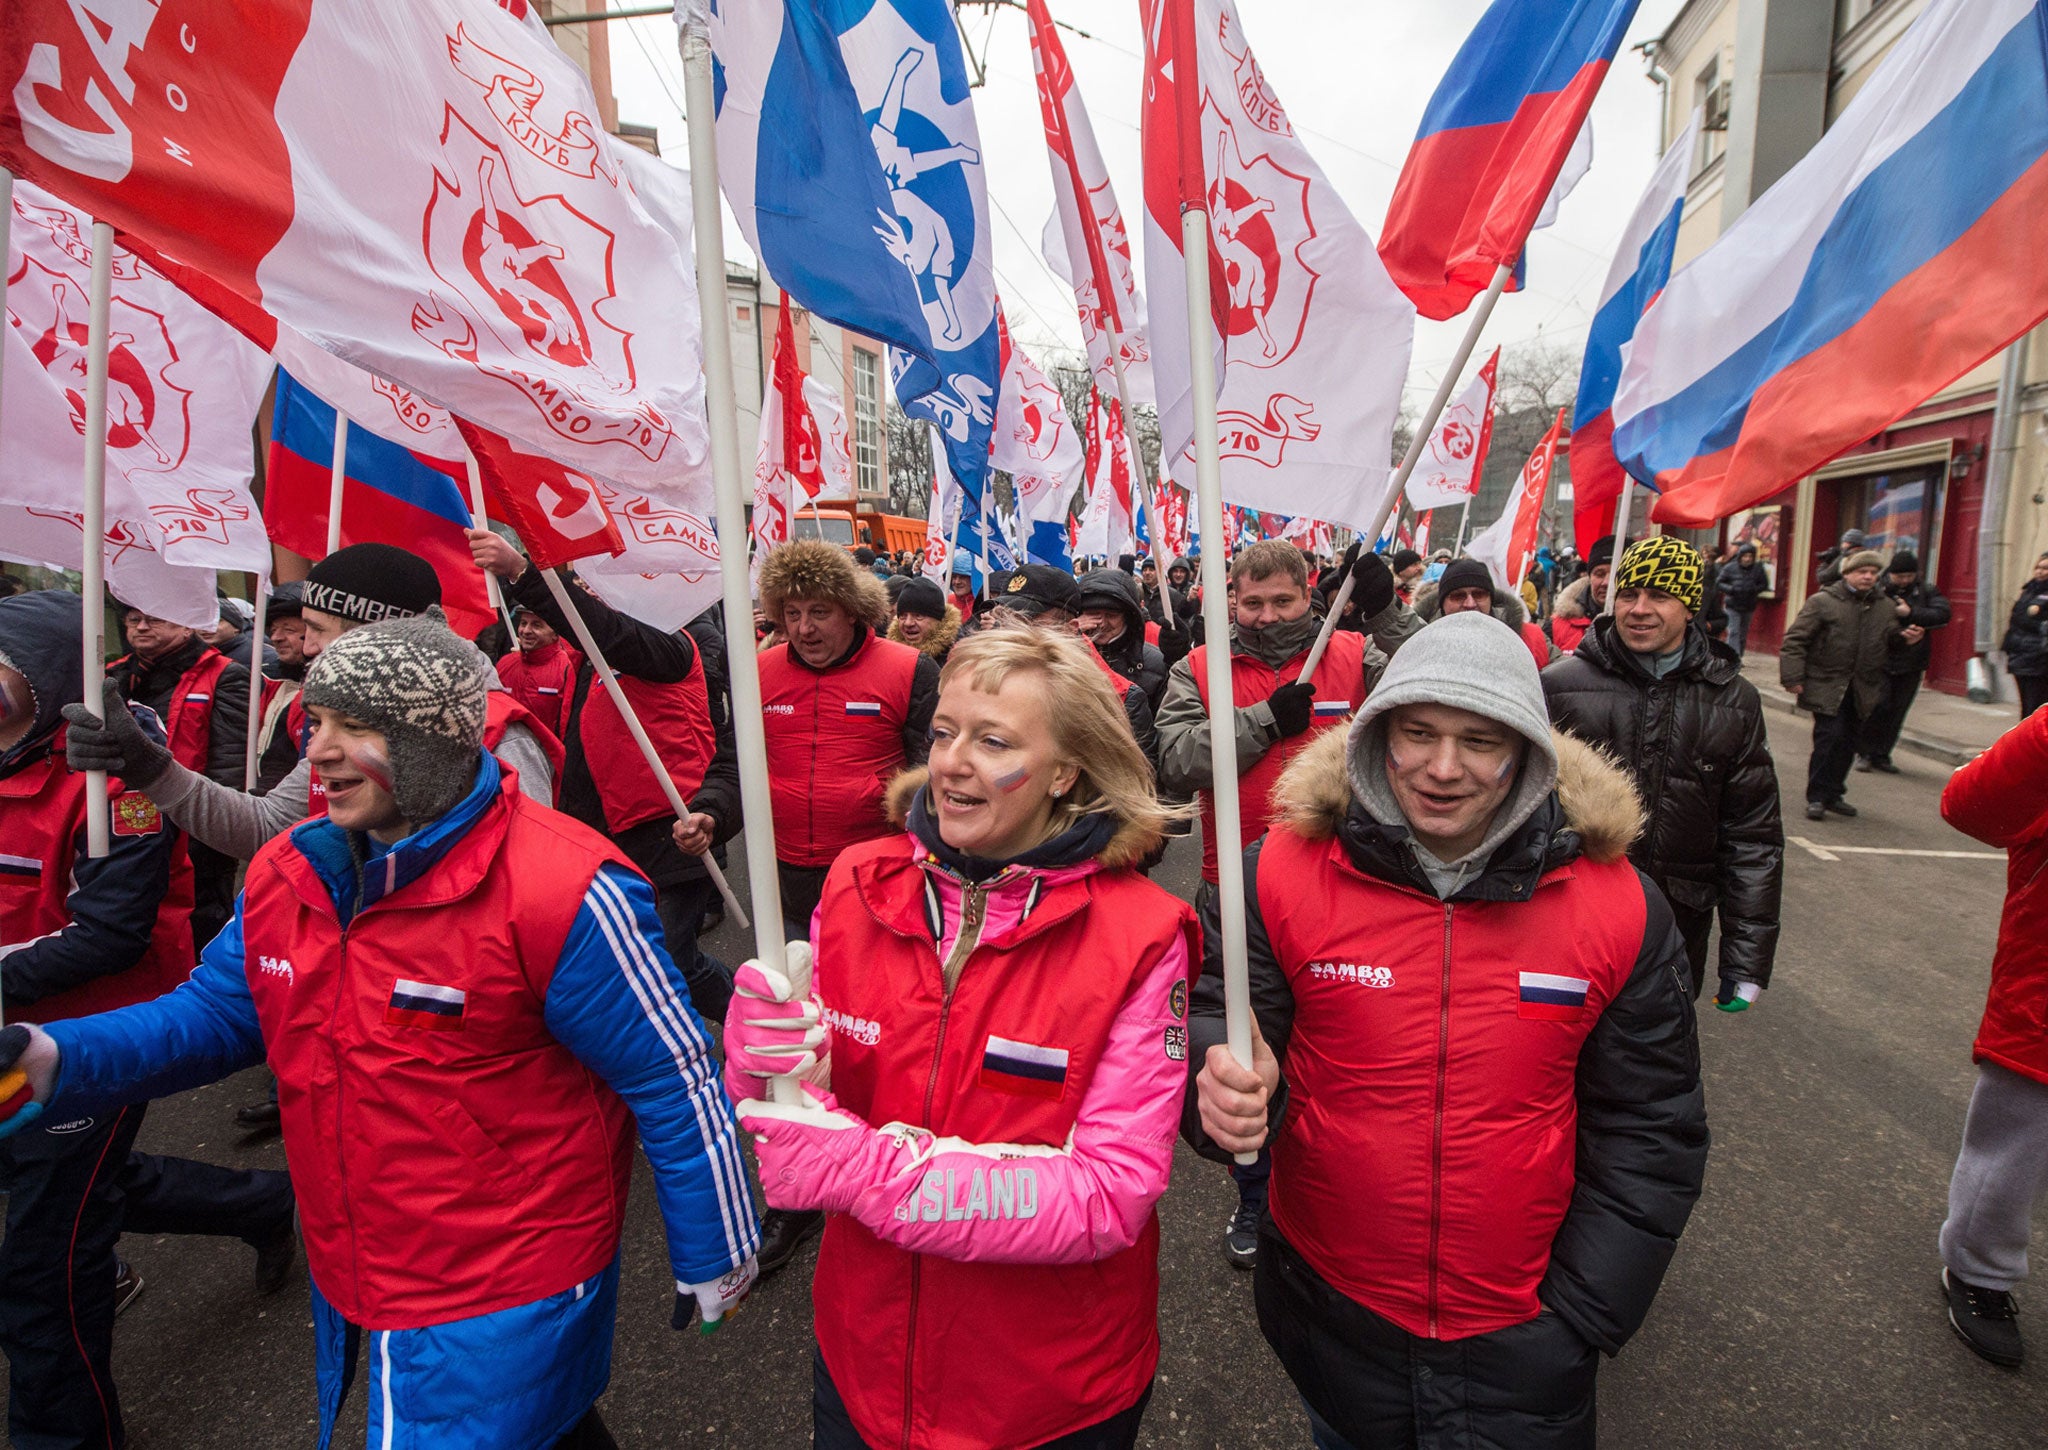 Pro-Kremlin activists march during a rally in support of ethnic Russians in Ukraine in central Moscow, March 2, 2014.